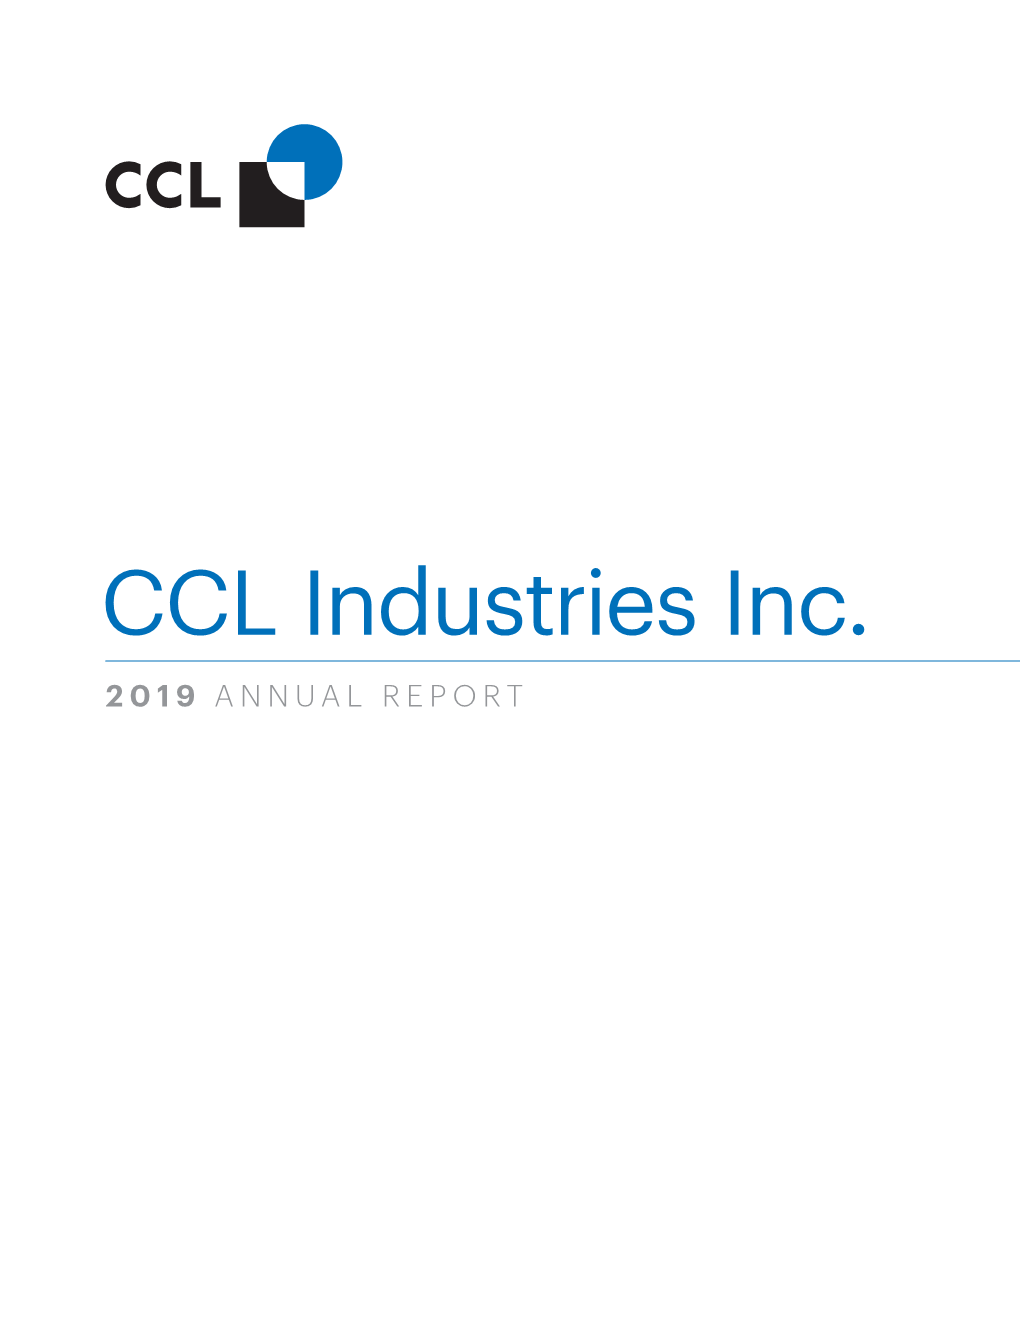 CCL Industries Inc. 2019 ANNUAL REPORT 21,400 183 42 6 Employees Production Facilities Countries Continents